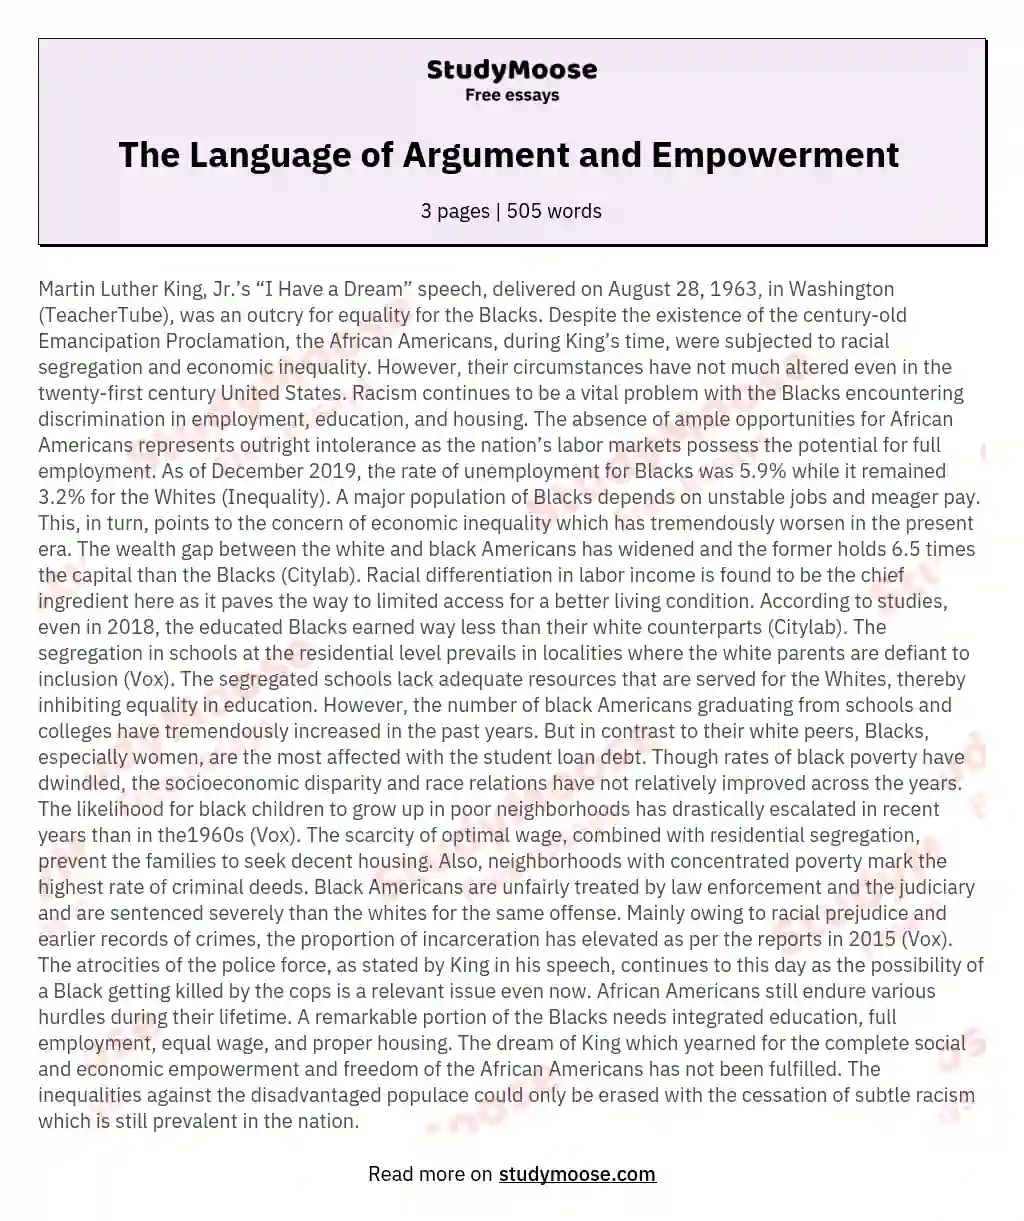 The Language of Argument and Empowerment  essay